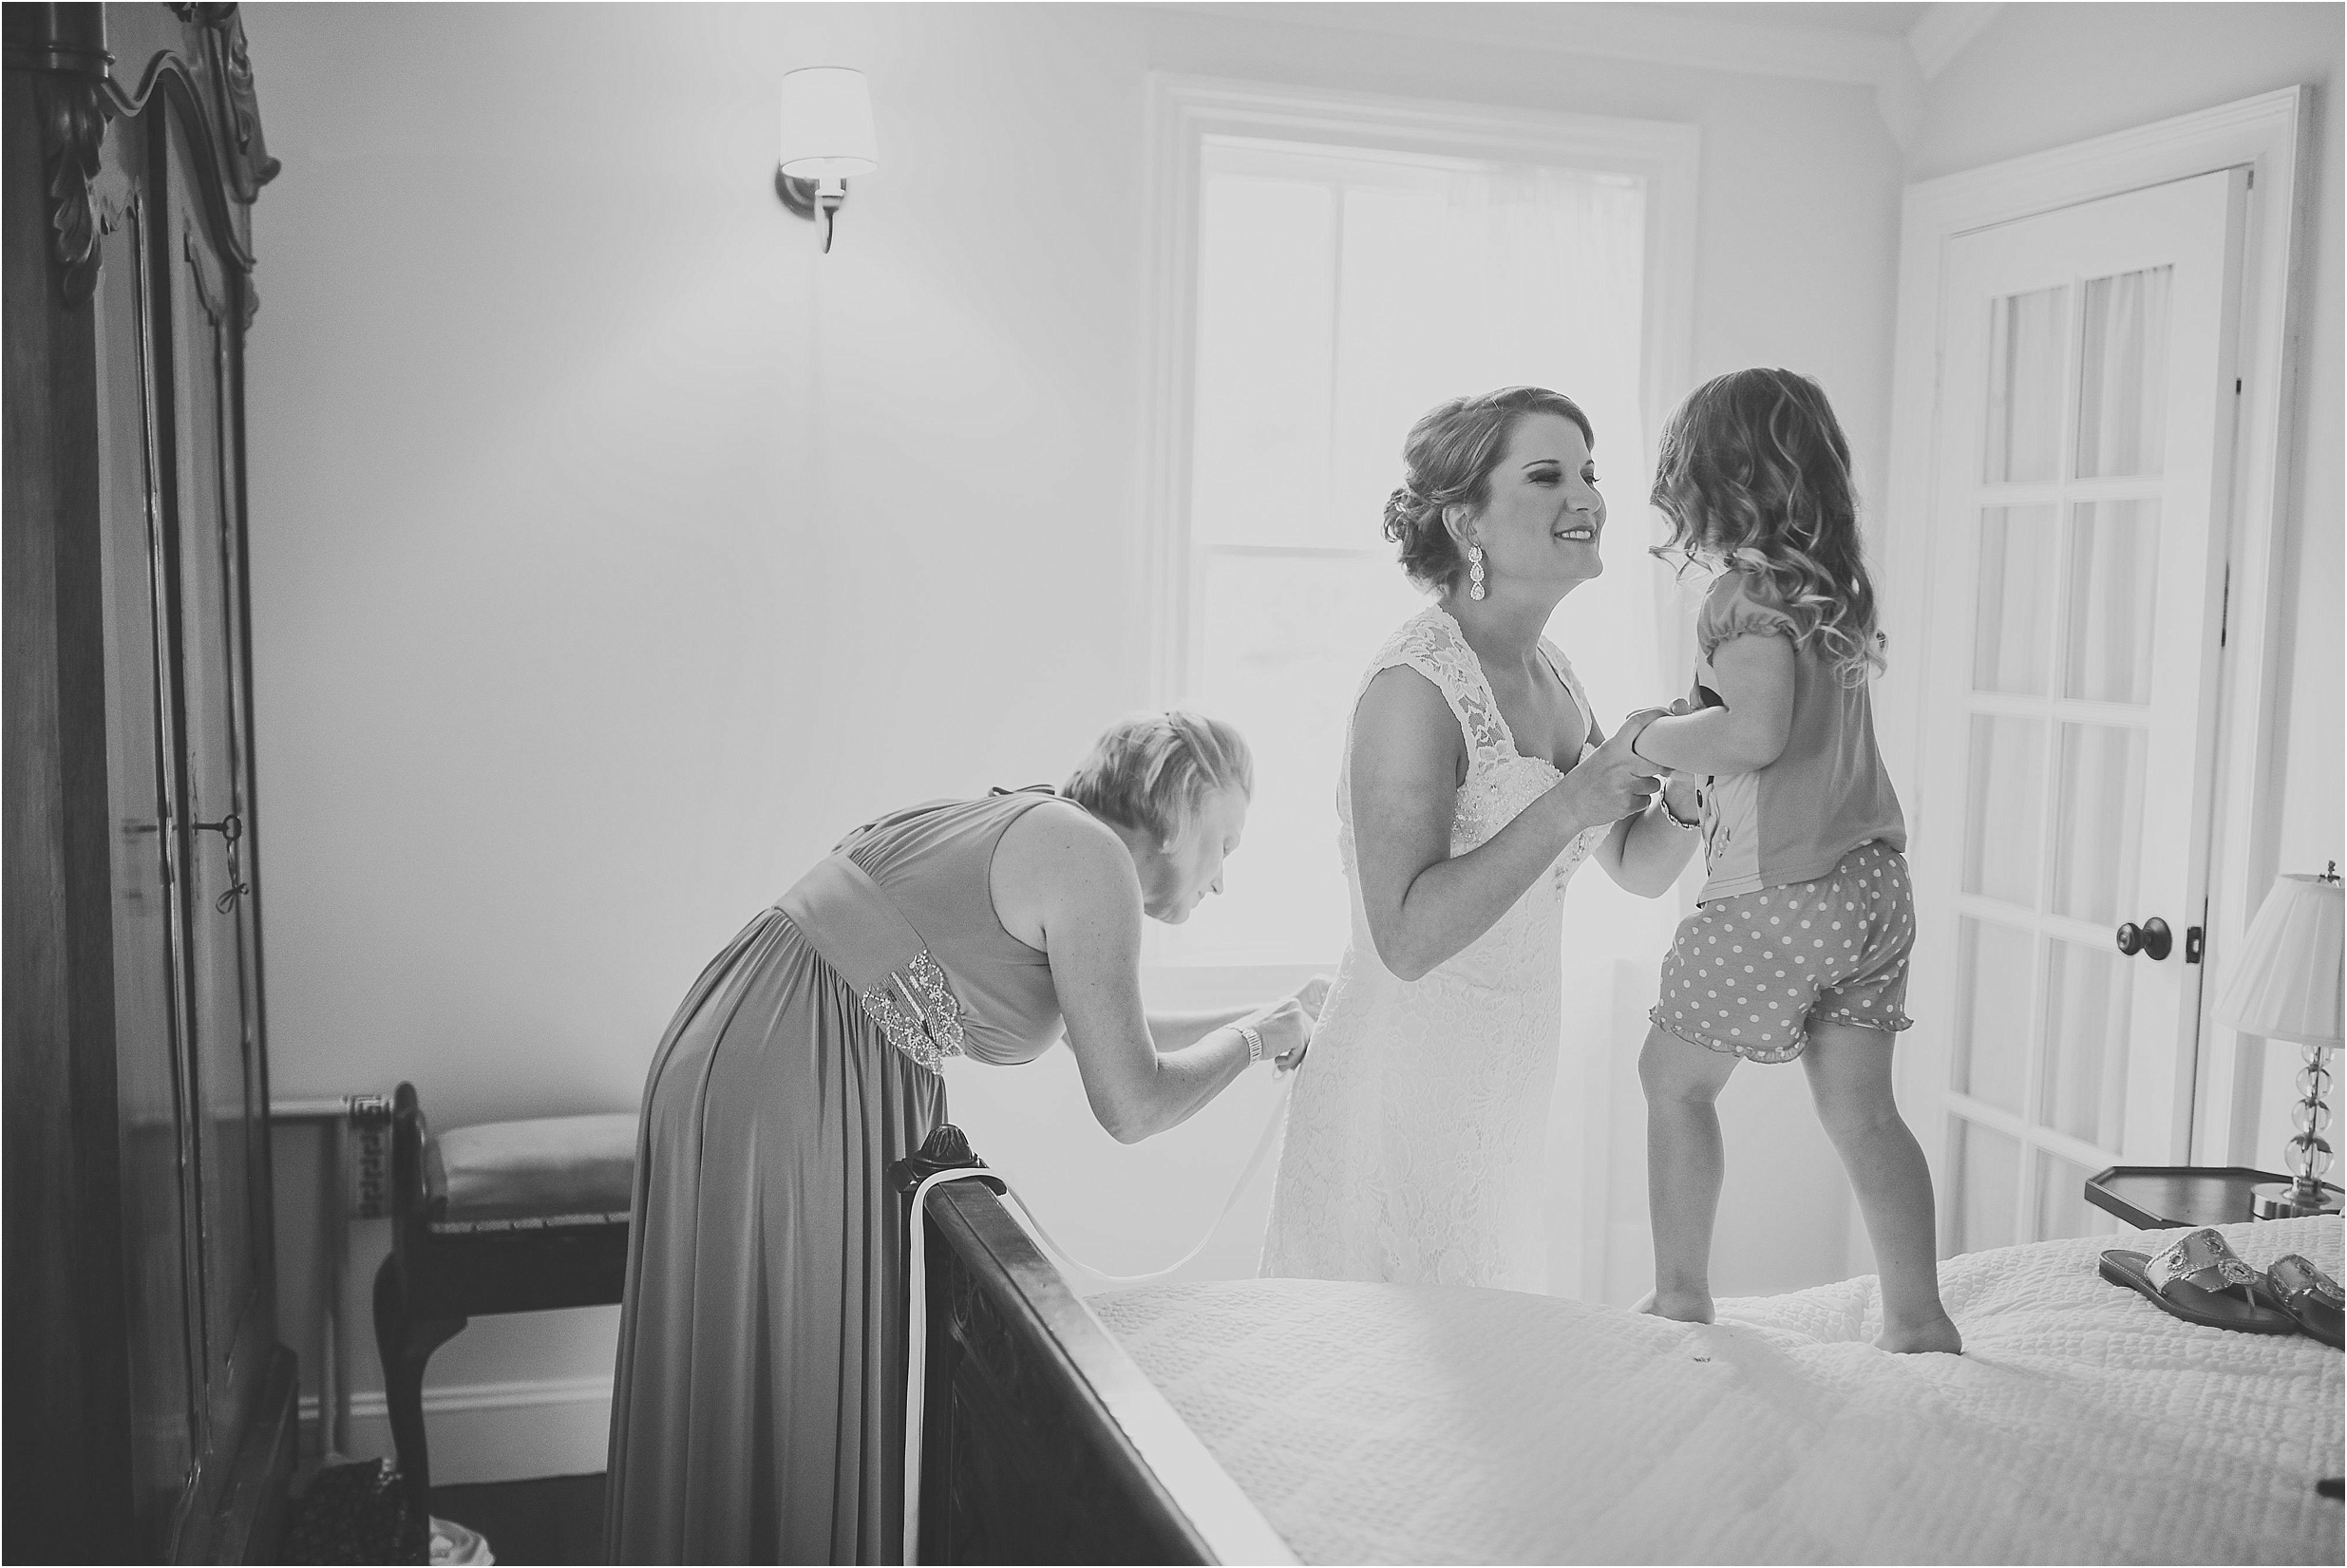 View More: http://christiclarkphotography.pass.us/brandonemily